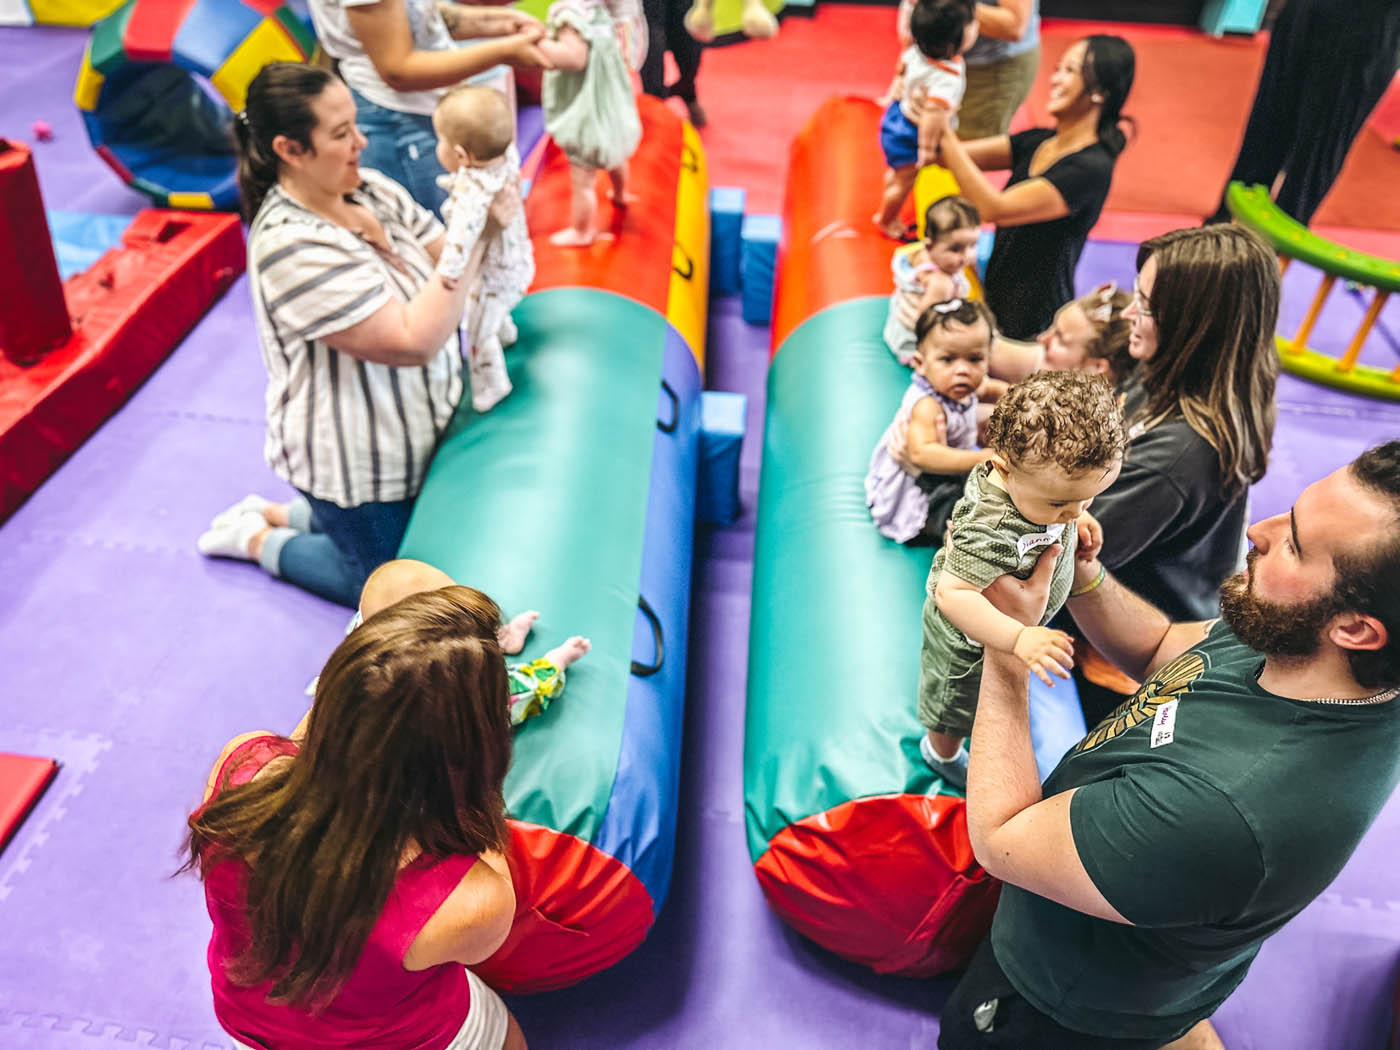 A group of parent and children enjoying Romp n' Roll North Raleigh's gym, review our frequently asked questions at Romp n' Roll North Raleigh.